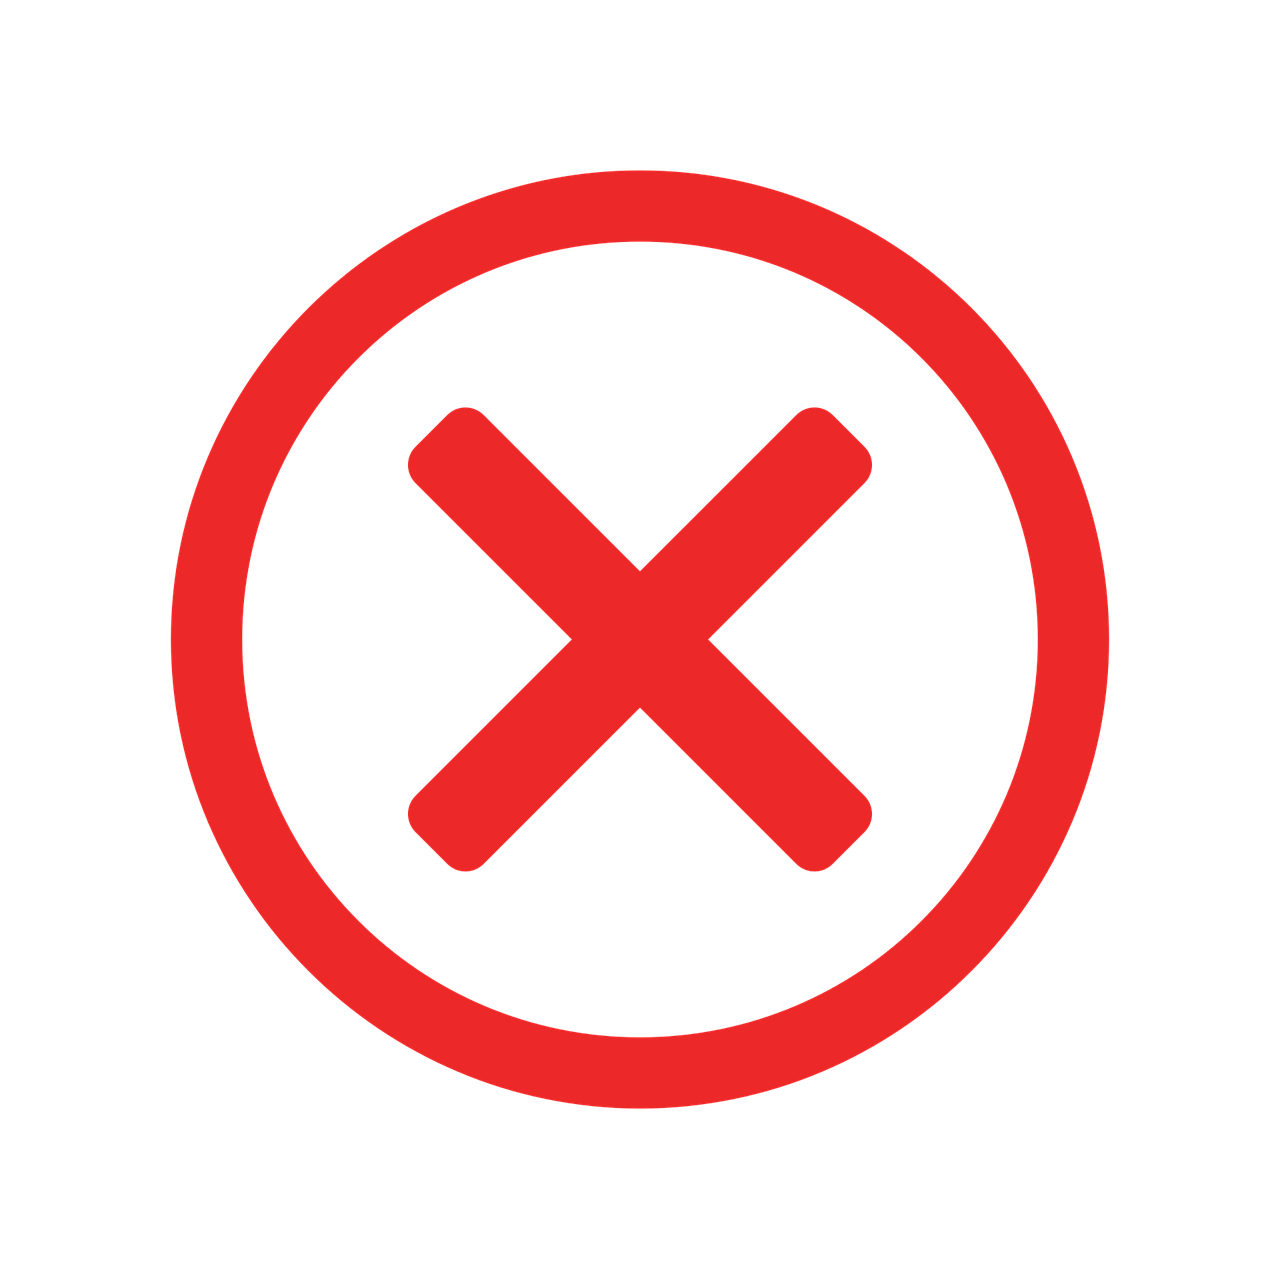 a red crossed sign on a black background, by Andrei Kolkoutine, excessivism, black circle, error, app icon, no nose